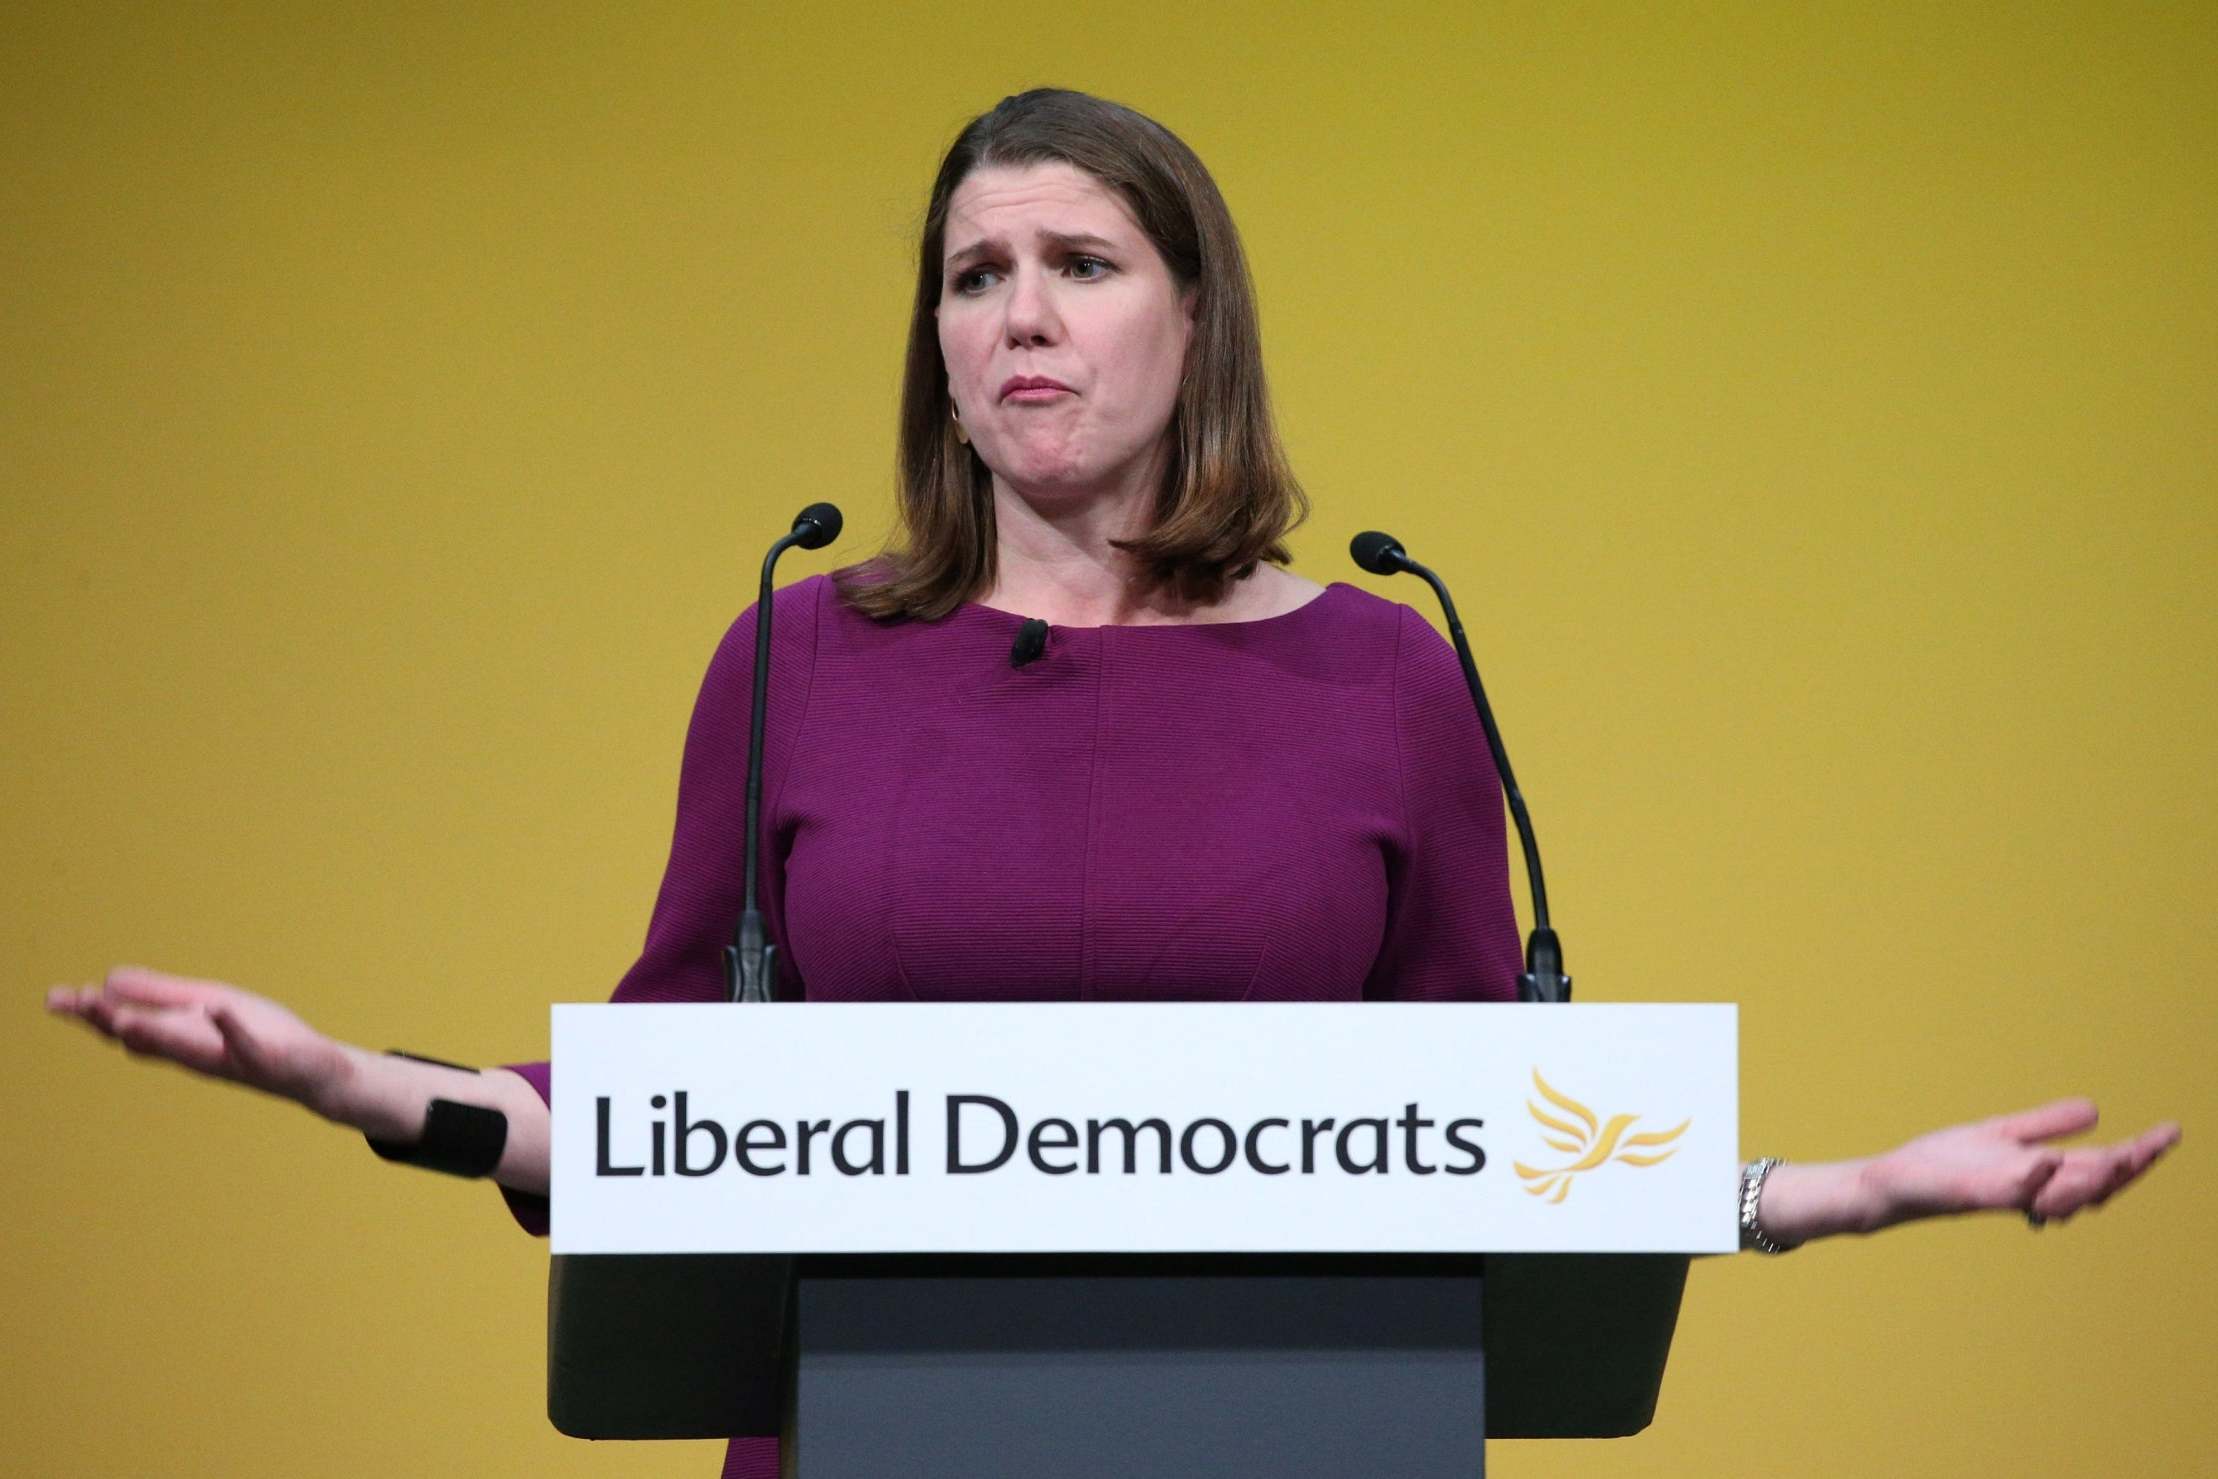 Related video: Culture secretary Nicky Morgan dismissed the Lib Dem and SNP move as a ‘stunt’, but the government has suggested it could support it